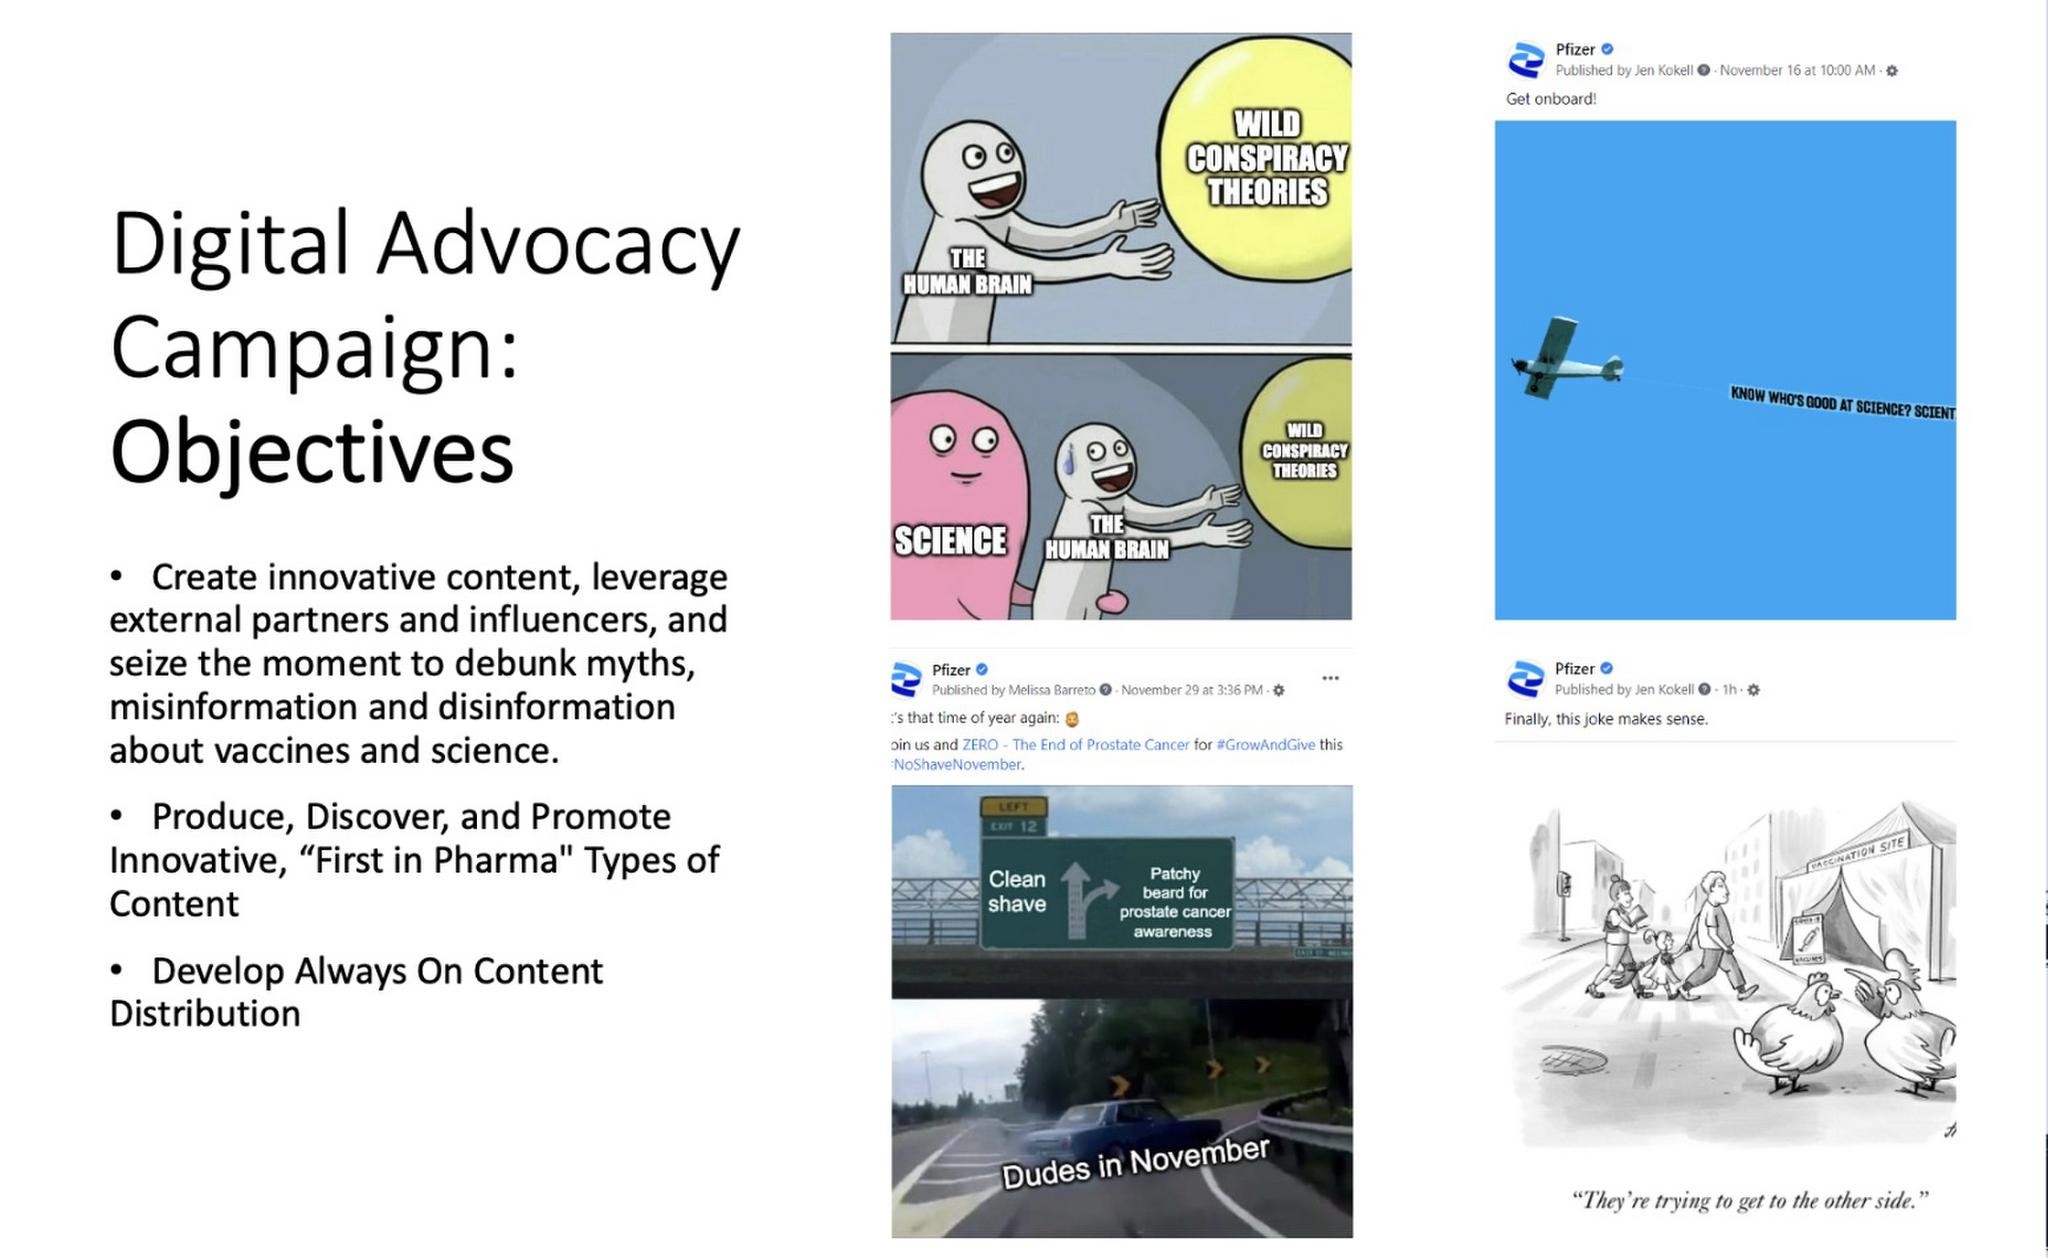 Digital Advocacy Initiative: Combating Science Misinformation